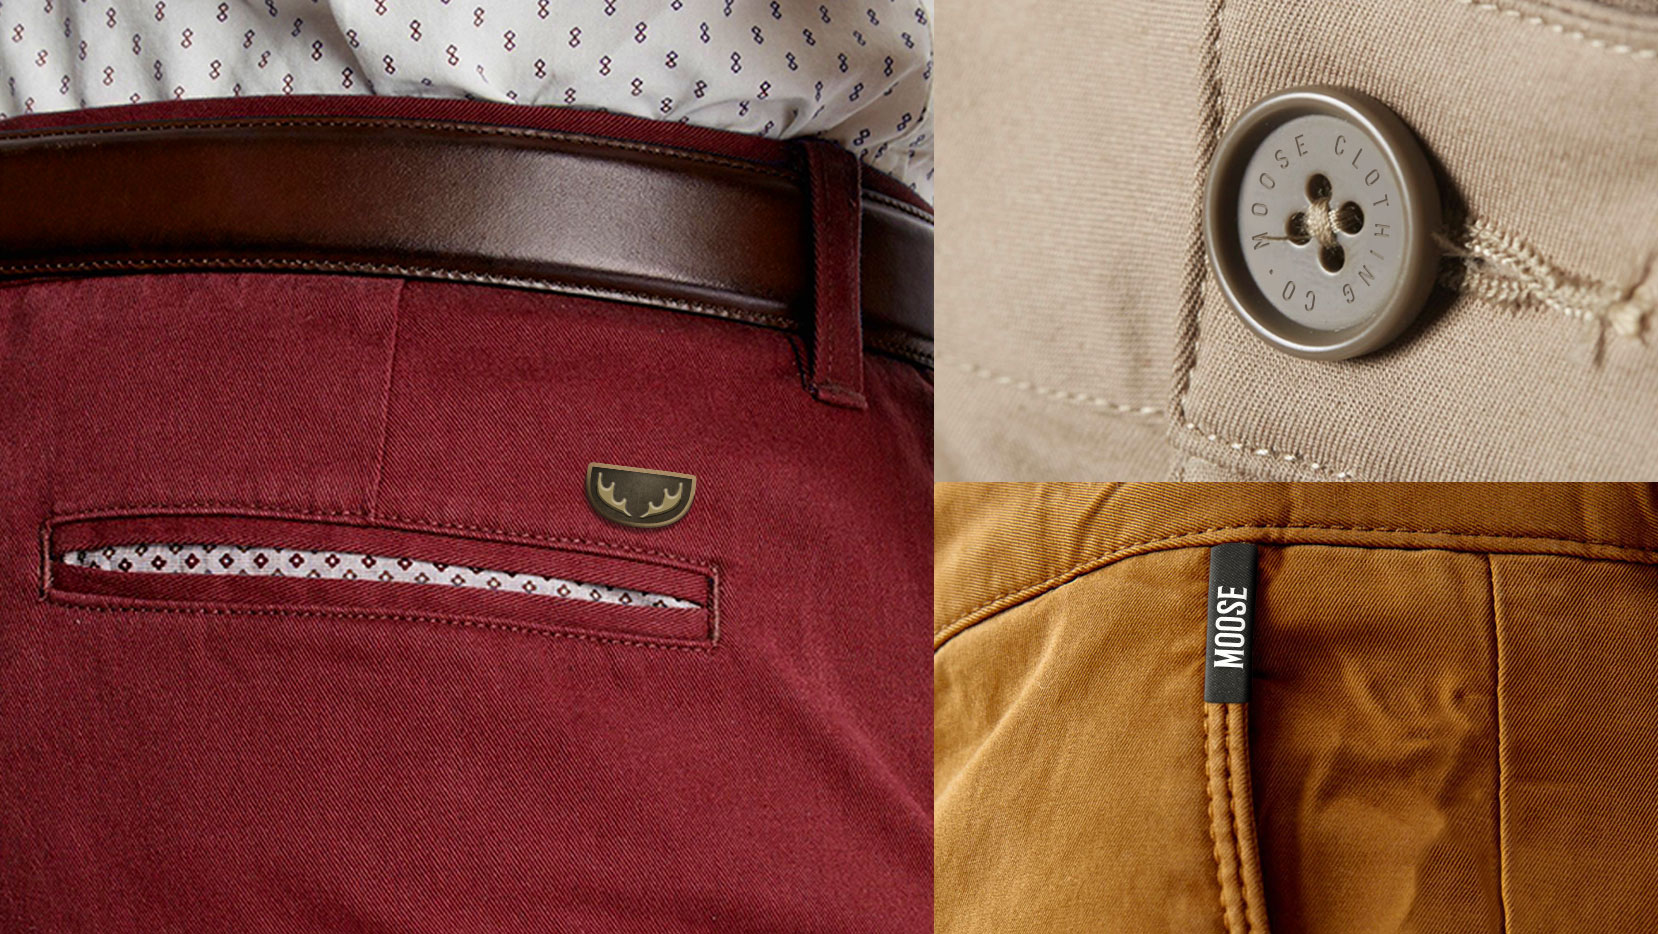 Logo pin, button detail and name tag on chinos